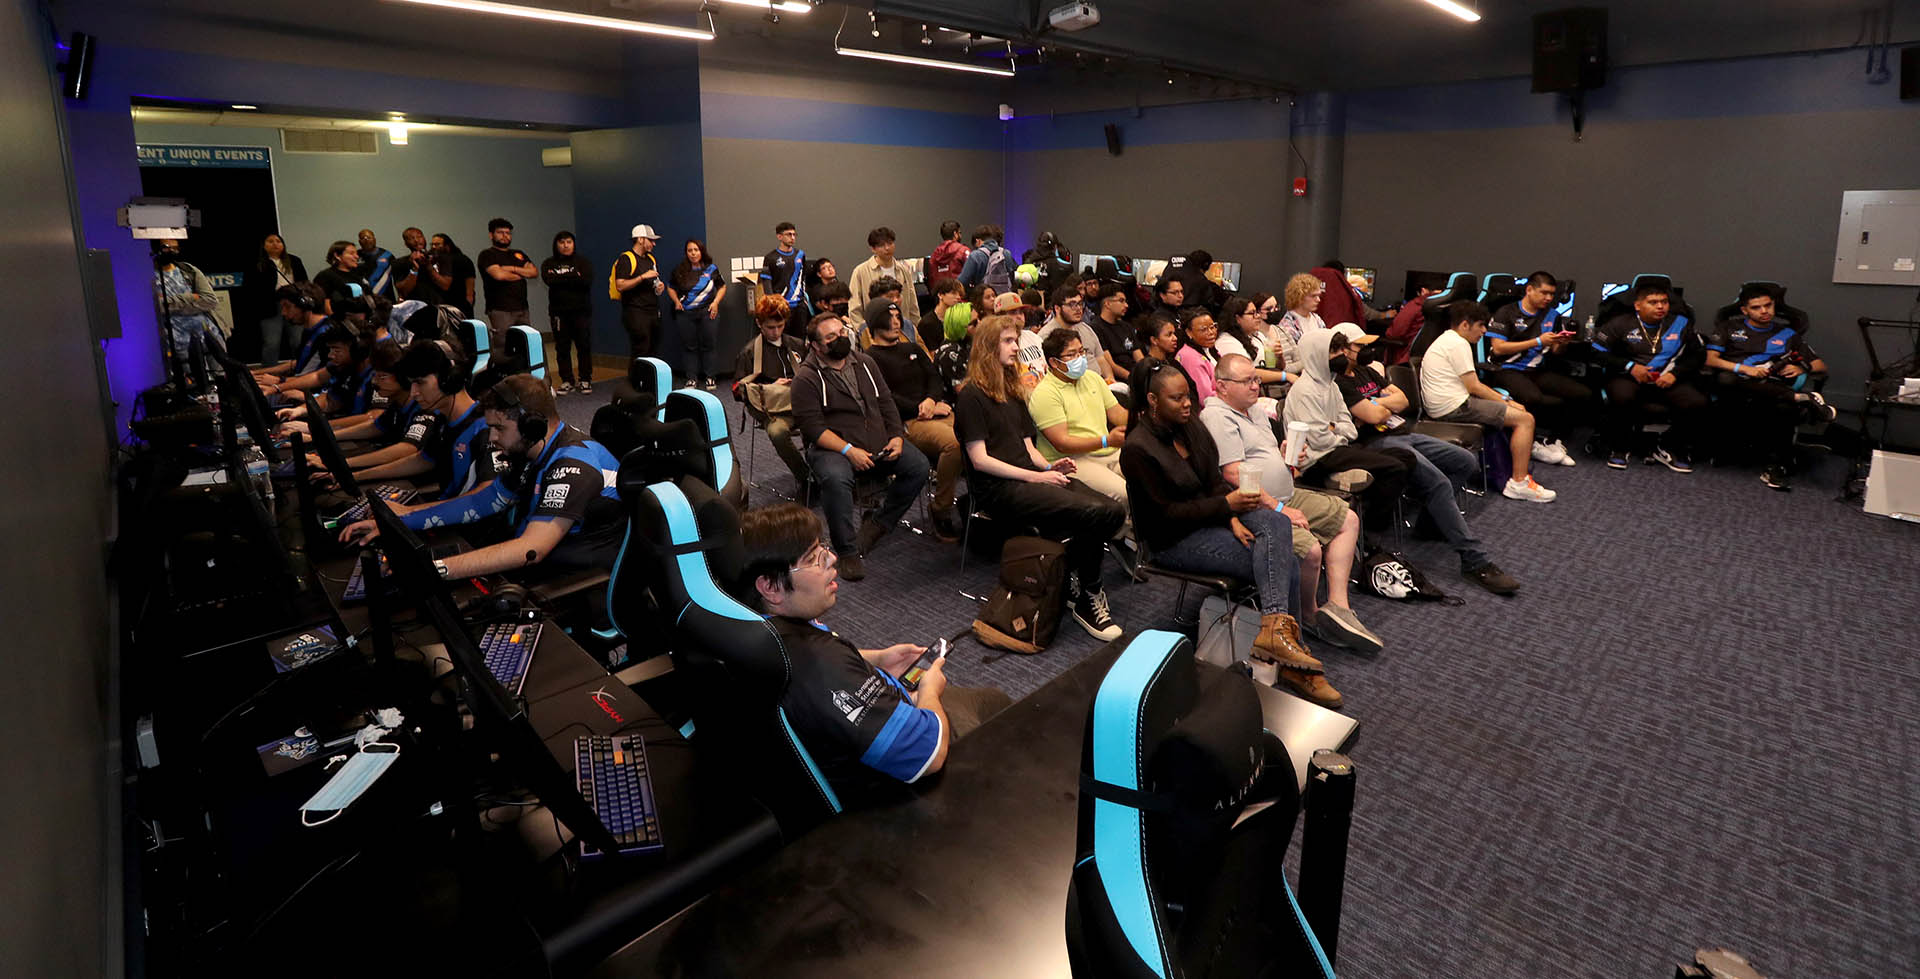 The audience watches on a big screen at the Esports Arena as the CSUSB Esports Club (left, on the computer keyboards) competes on a match.